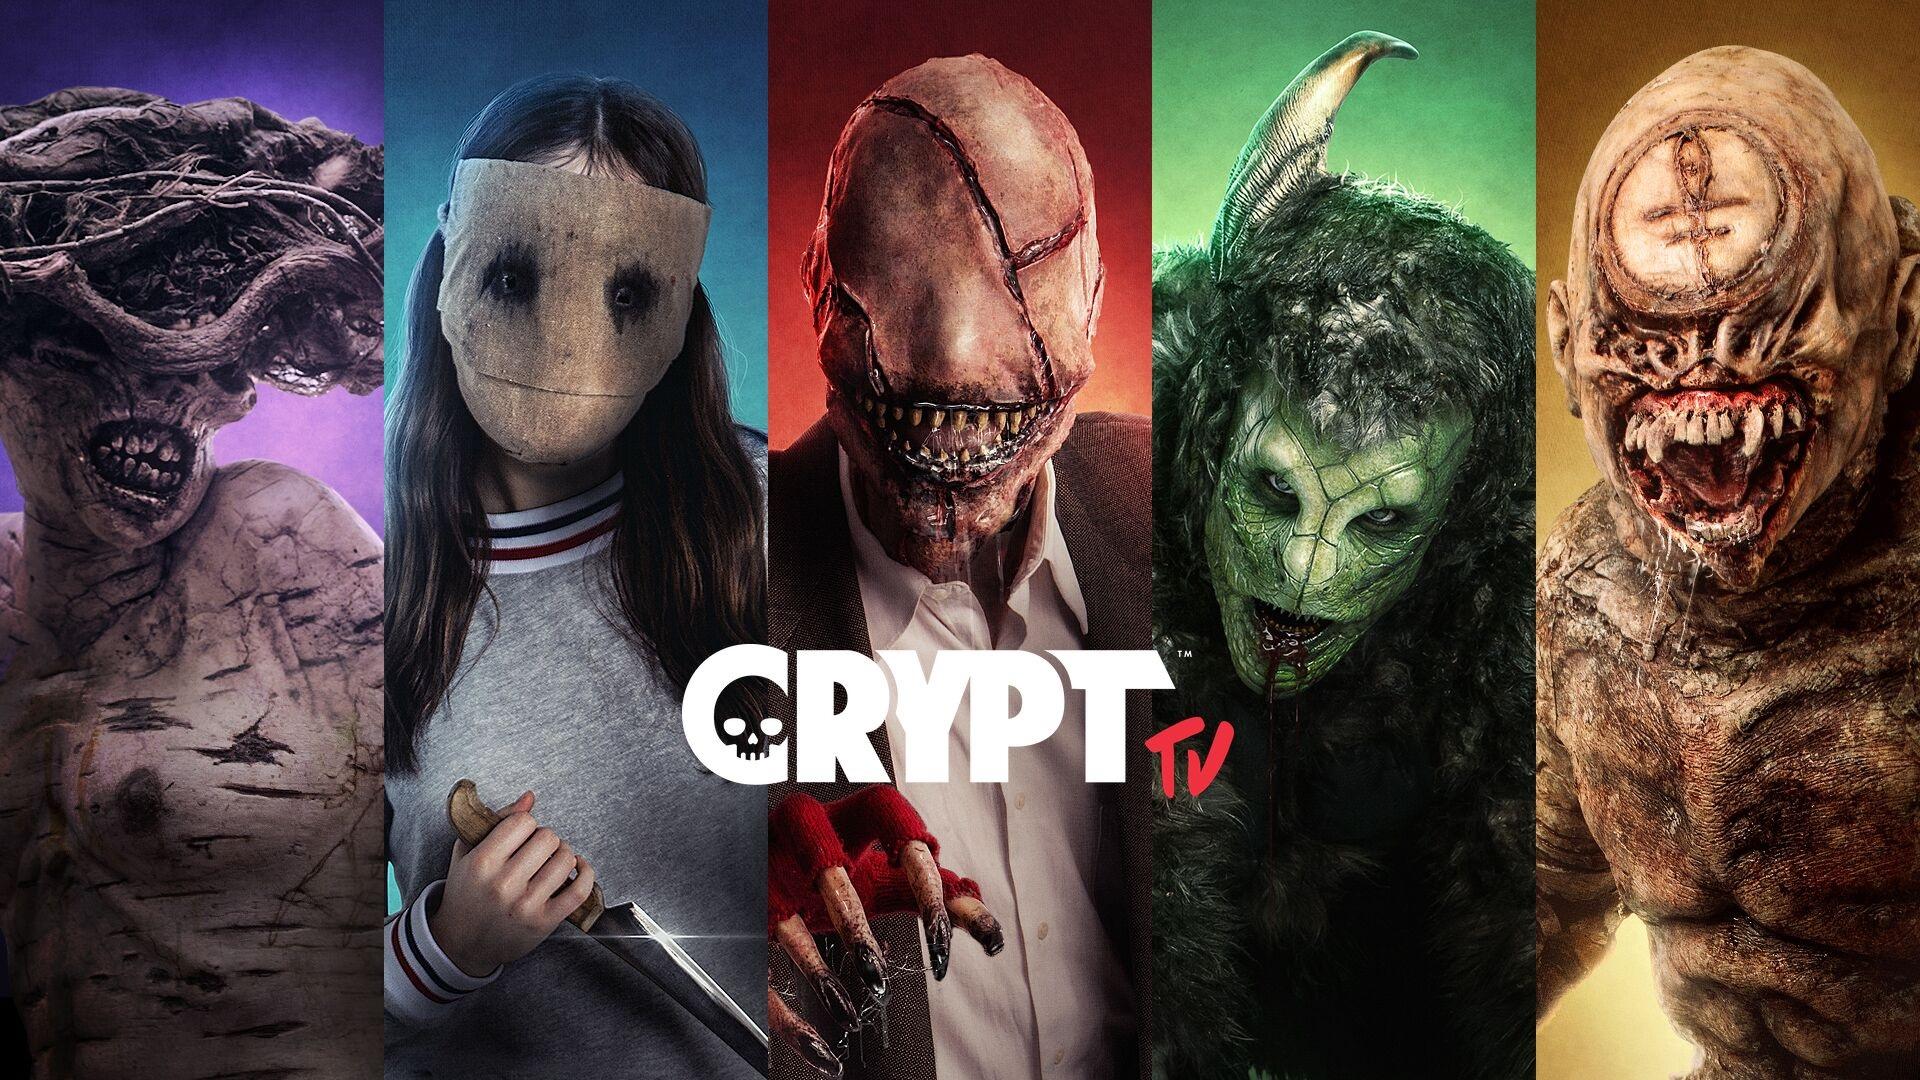 Facebook Signs Deal With Crypt TV for Slate of Five Horror